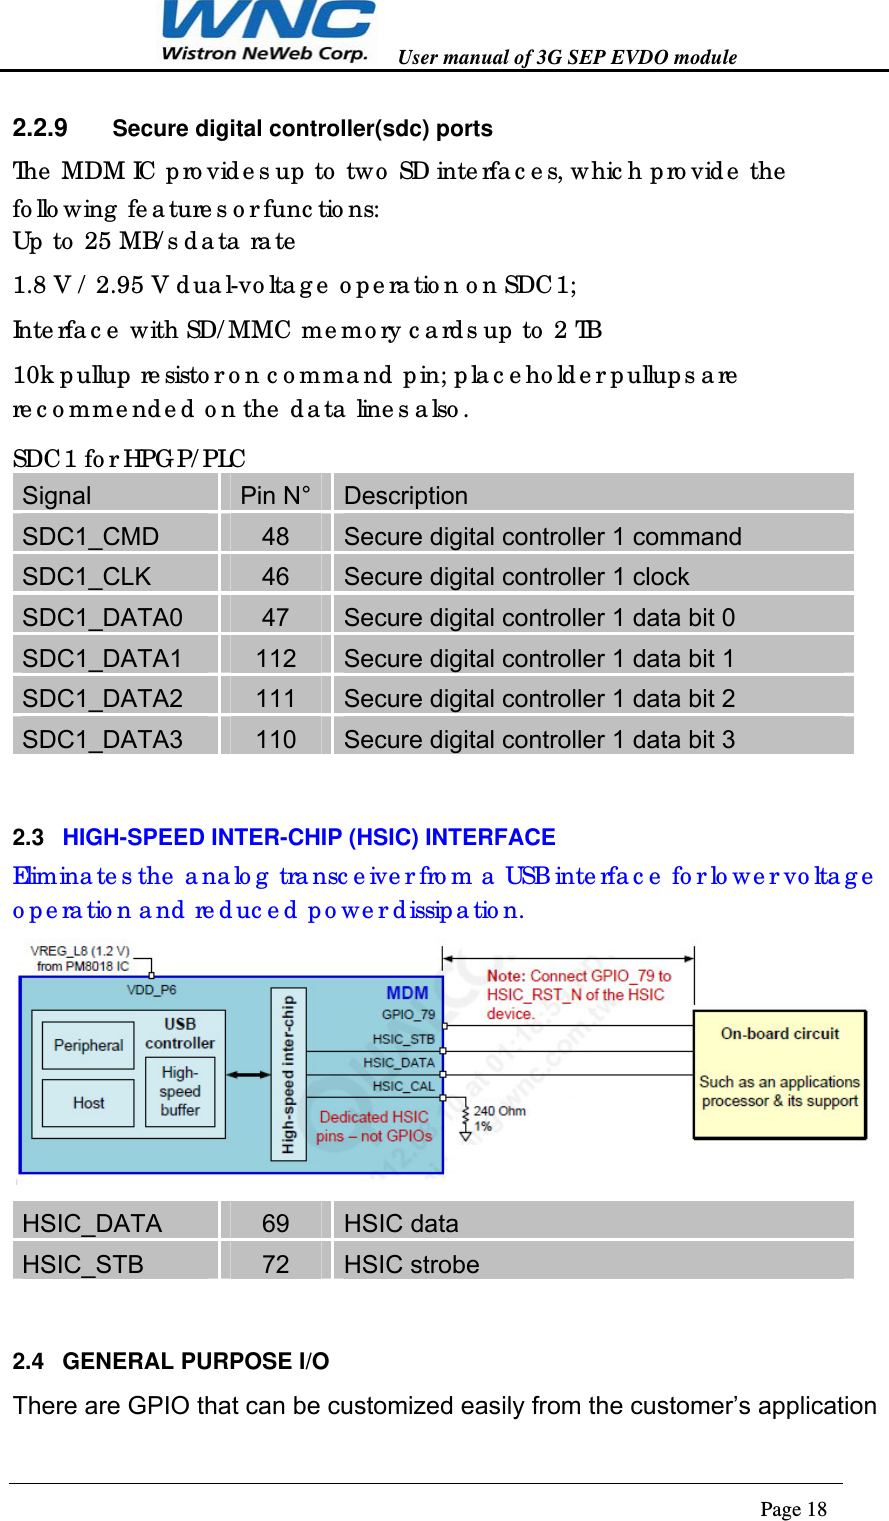   User manual of 3G SEP EVDO module                                                                      Page 18  2.2.9  Secure digital controller(sdc) ports The MDM IC provides up to two SD interfaces, which provide the following features or functions: Up to 25 MB/s data rate   1.8 V / 2.95 V dual-voltage operation on SDC1;   Interface with SD/MMC memory cards up to 2 TB   10k pullup resistor on command pin; placeholder pullups are recommended on the data lines also.   SDC1 for HPGP/PLC Signal  Pin N°  Description SDC1_CMD  48  Secure digital controller 1 command SDC1_CLK  46  Secure digital controller 1 clock SDC1_DATA0  47  Secure digital controller 1 data bit 0 SDC1_DATA1  112  Secure digital controller 1 data bit 1 SDC1_DATA2  111  Secure digital controller 1 data bit 2 SDC1_DATA3  110  Secure digital controller 1 data bit 3 2.3  HIGH-SPEED INTER-CHIP (HSIC) INTERFACE Eliminates the analog transceiver from a USB interface for lower voltage operation and reduced power dissipation.  HSIC_DATA  69  HSIC data HSIC_STB  72  HSIC strobe 2.4 GENERAL PURPOSE I/O  There are GPIO that can be customized easily from the customer’s application 